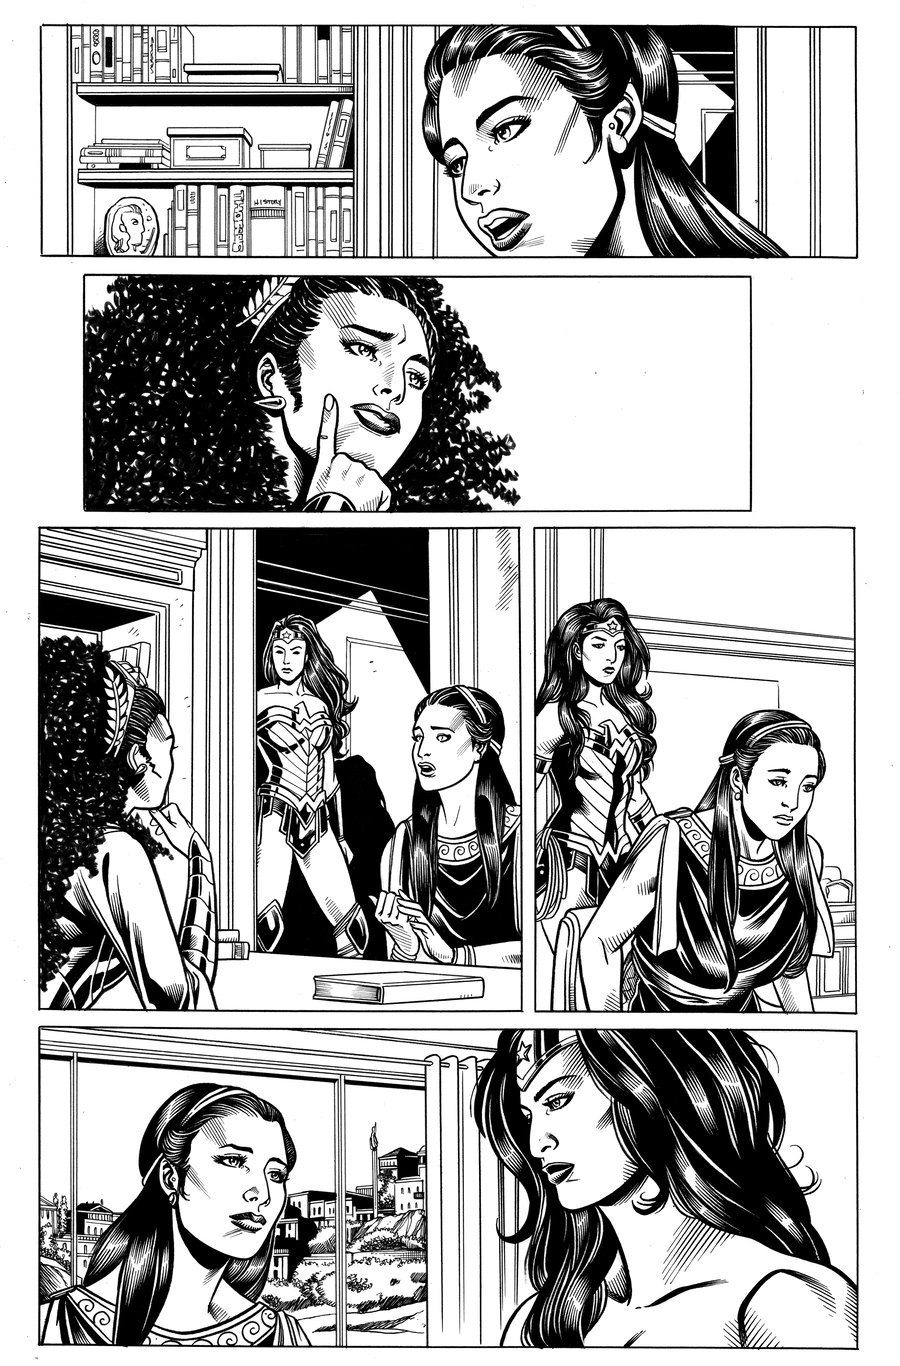 Image of Nubia and the Amazons #6 PG 21